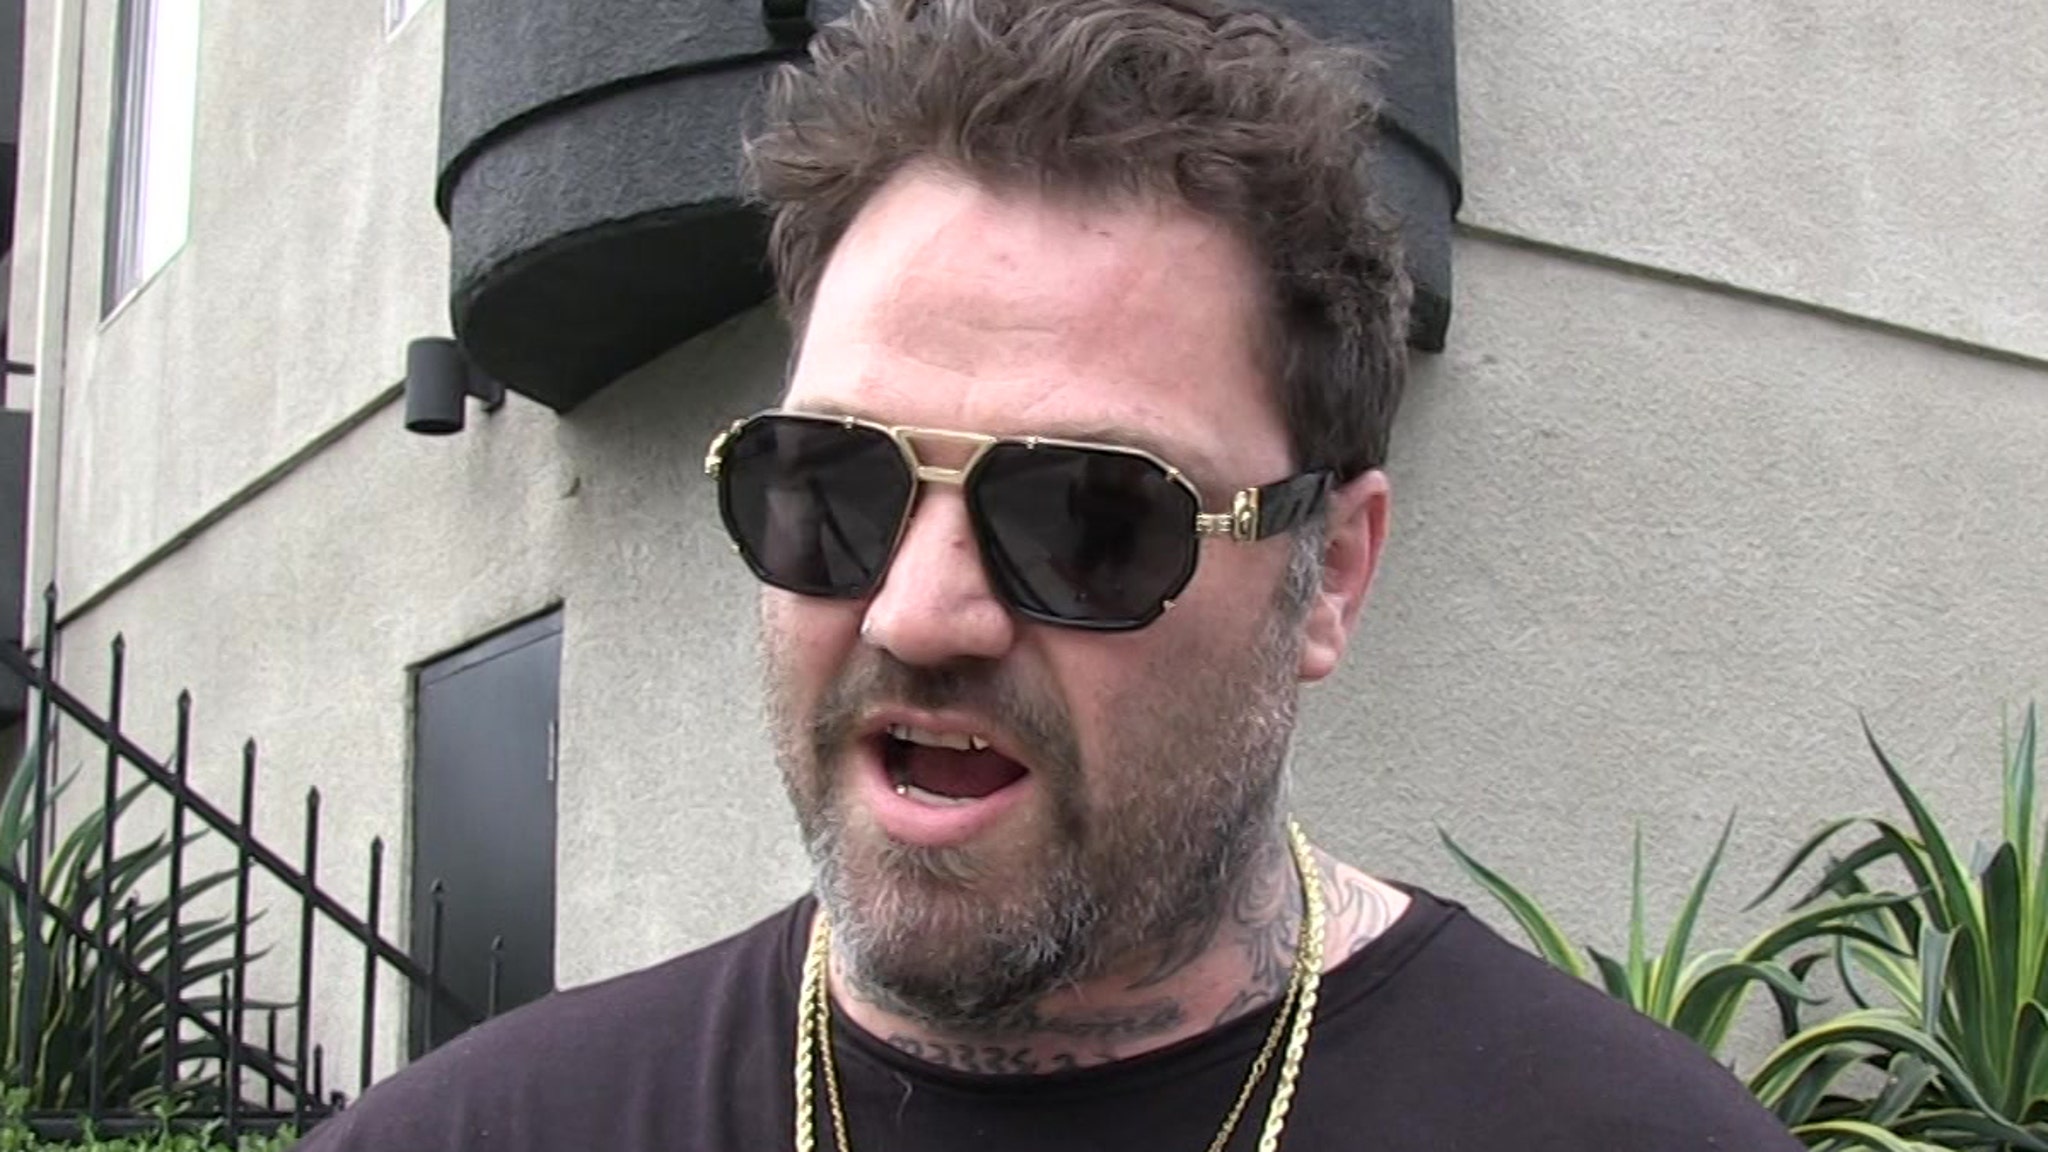 Bam Margera Reported Missing After Fleeing Rehab Center – TMZ